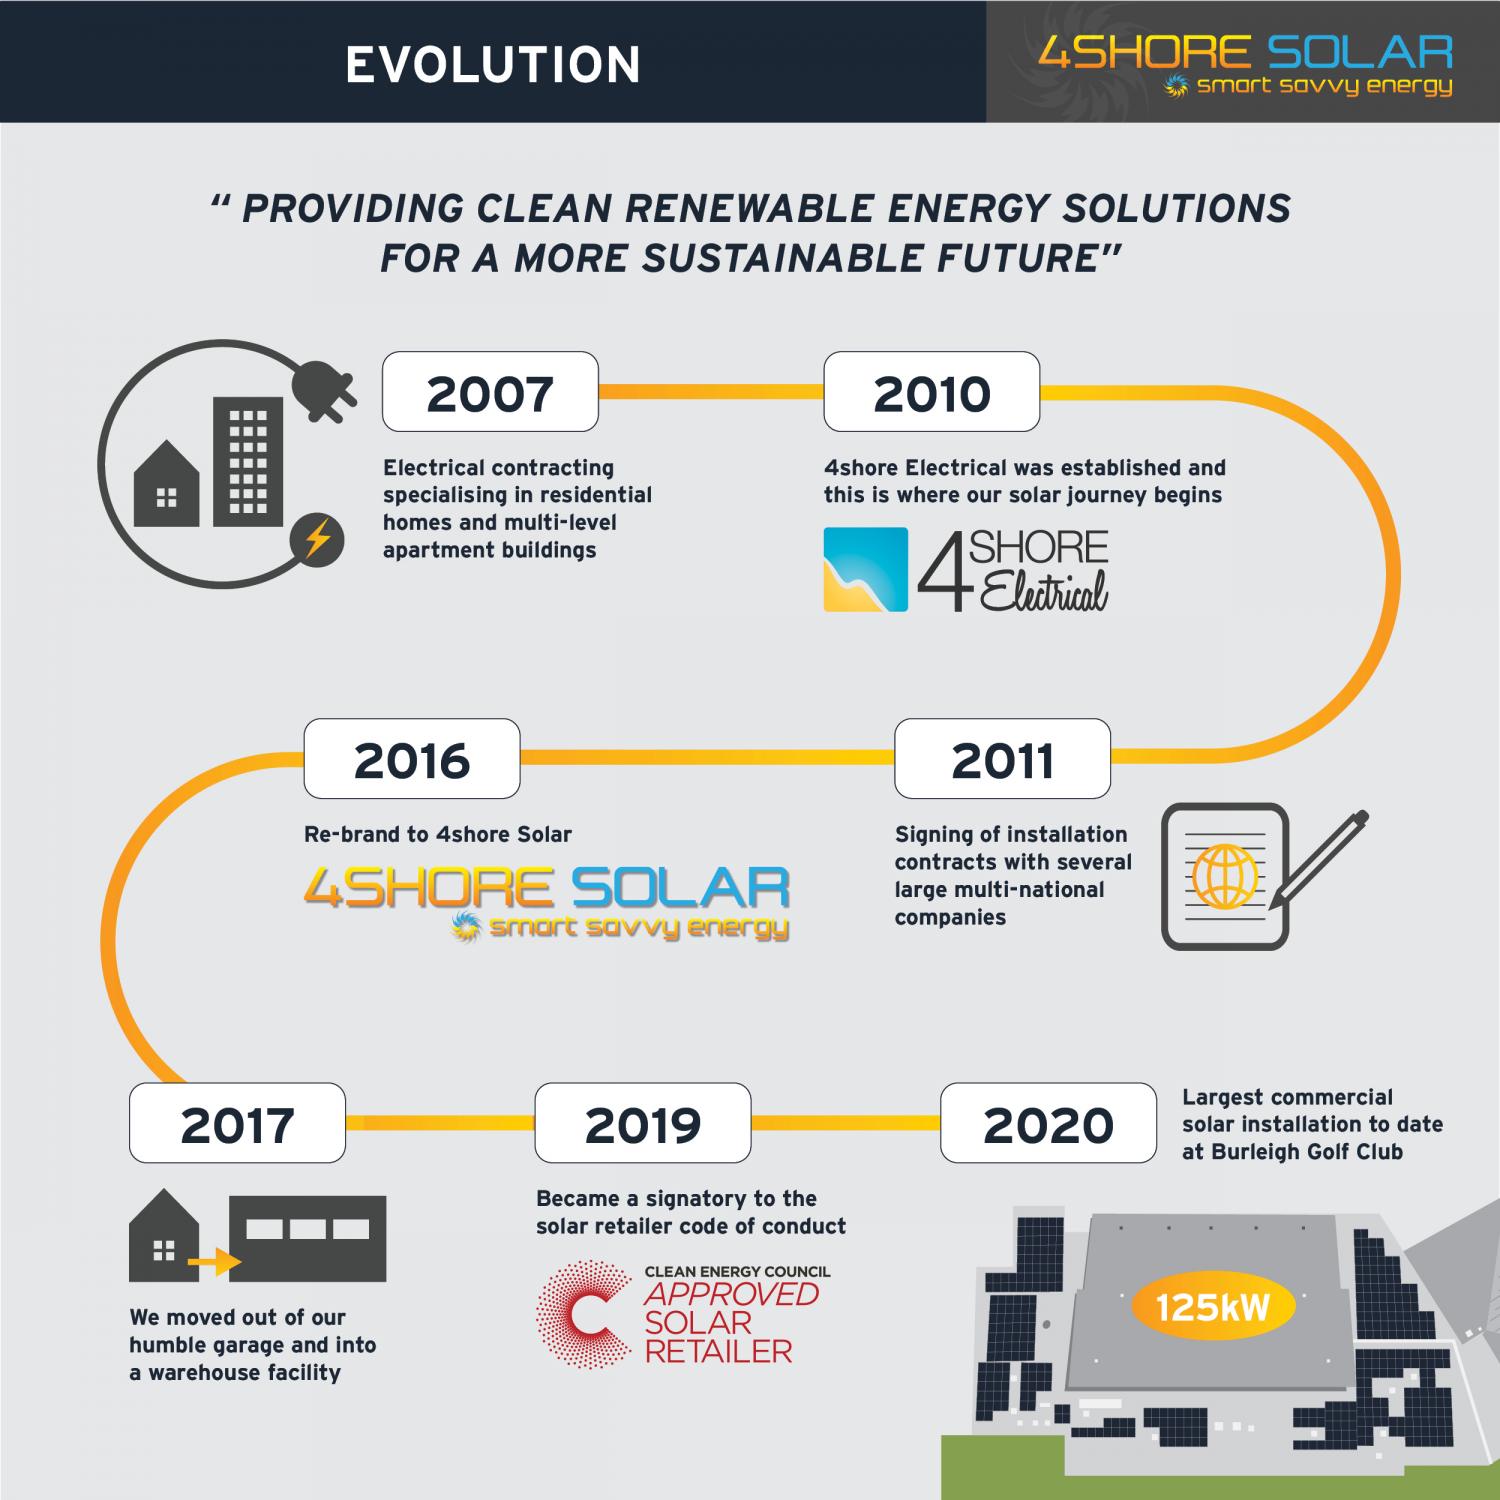 The evolution of 4shore solar dating back to its inception in 2010.